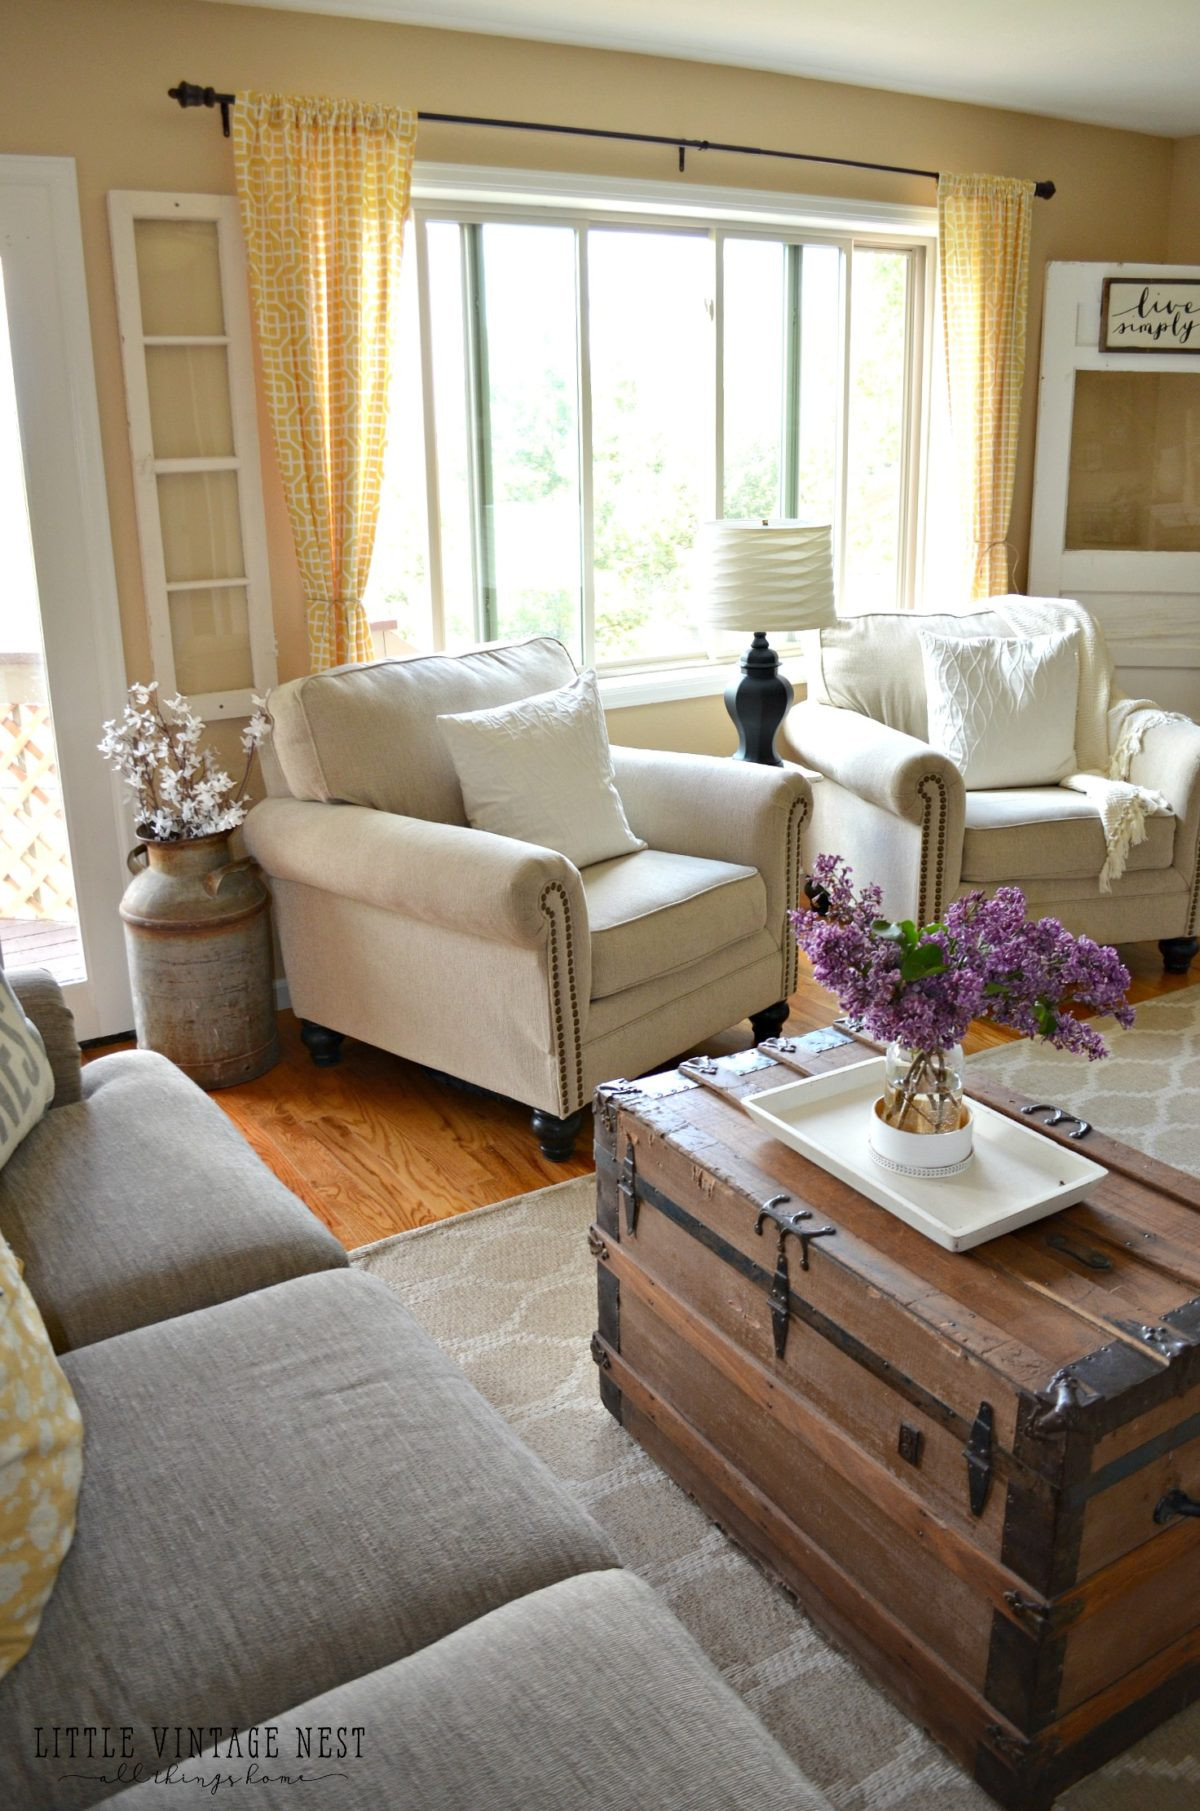 Farmhouse Style Living Room Ideas
 How I Transitioned to Farmhouse Style Little Vintage Nest